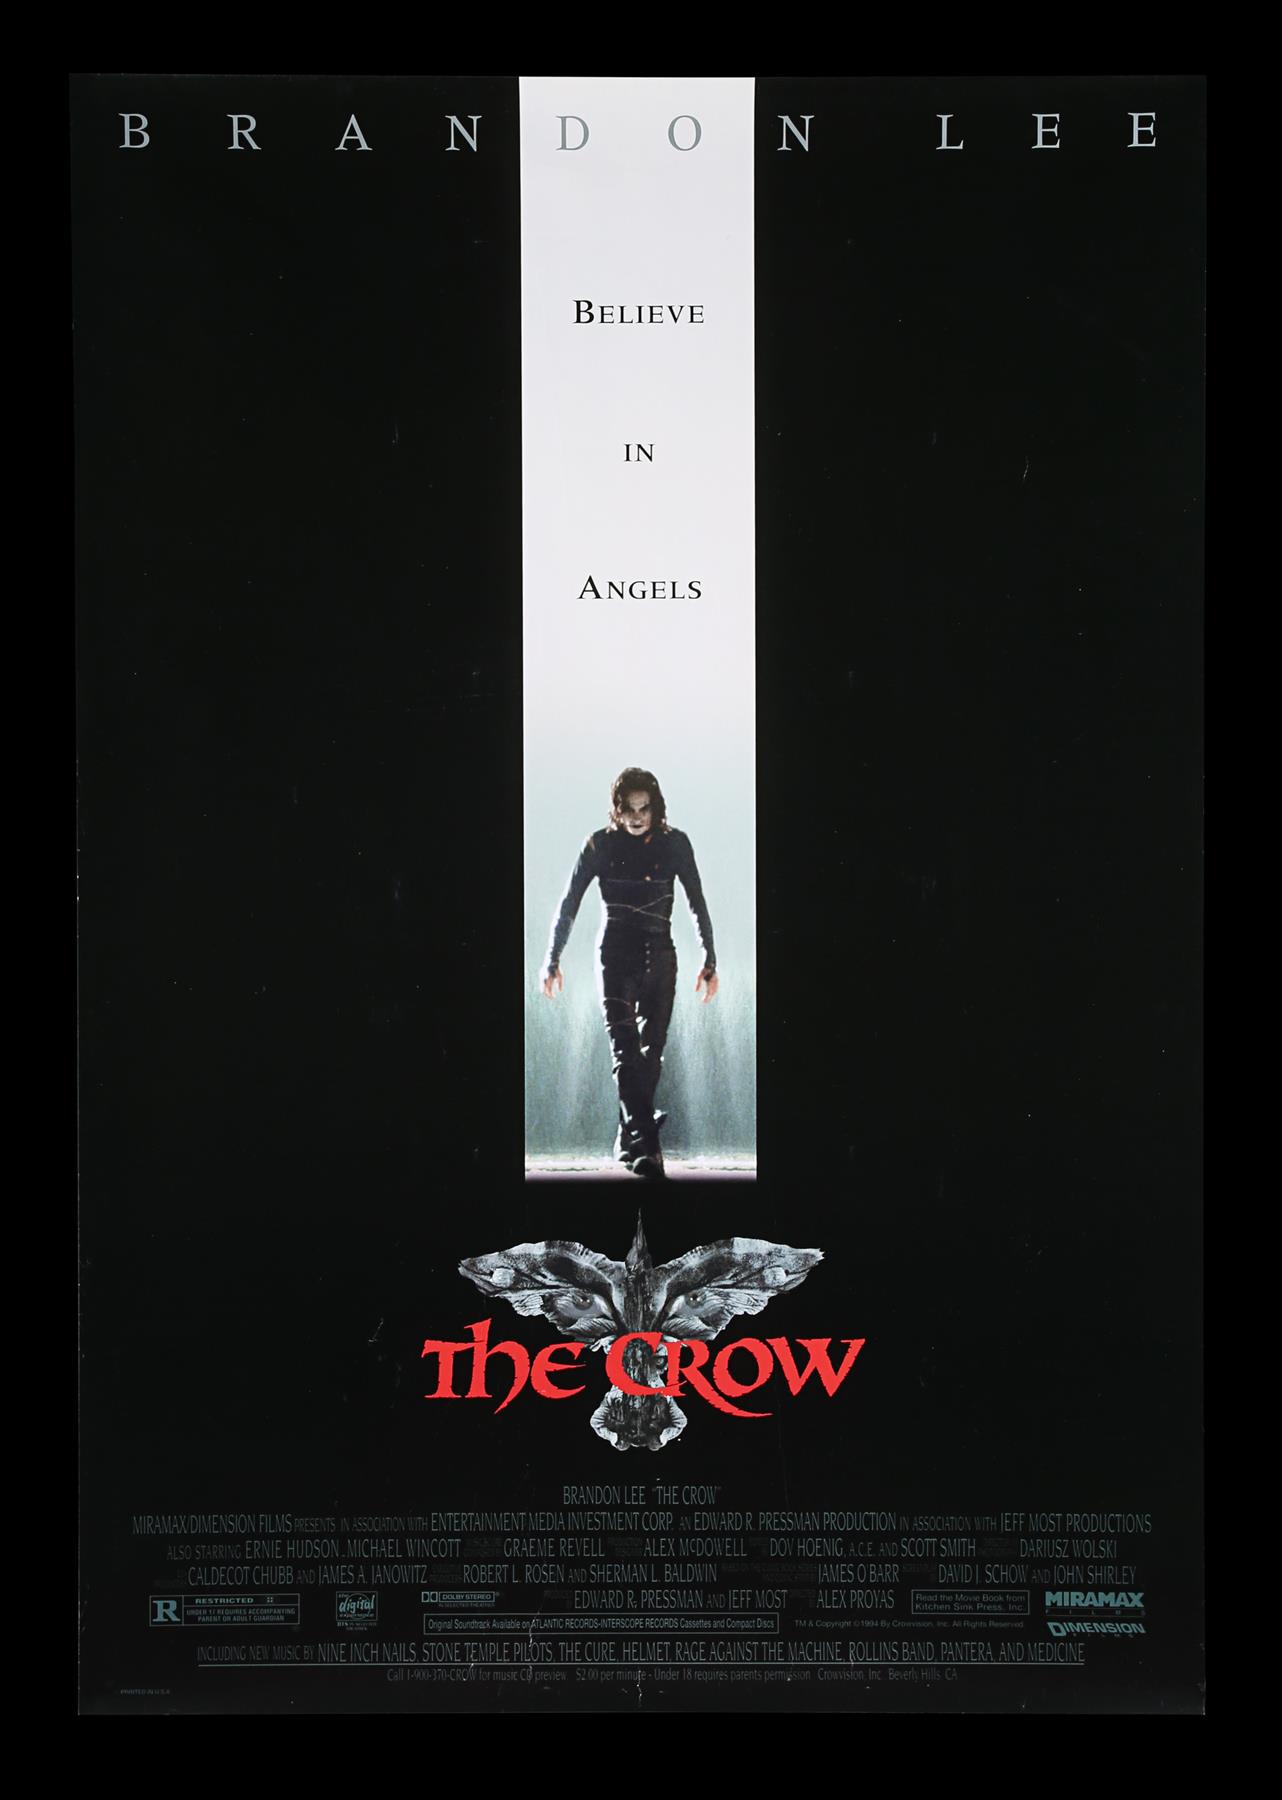 THE CROW (1994) - US One-Sheet and UK Quad, 1994 - Image 2 of 7